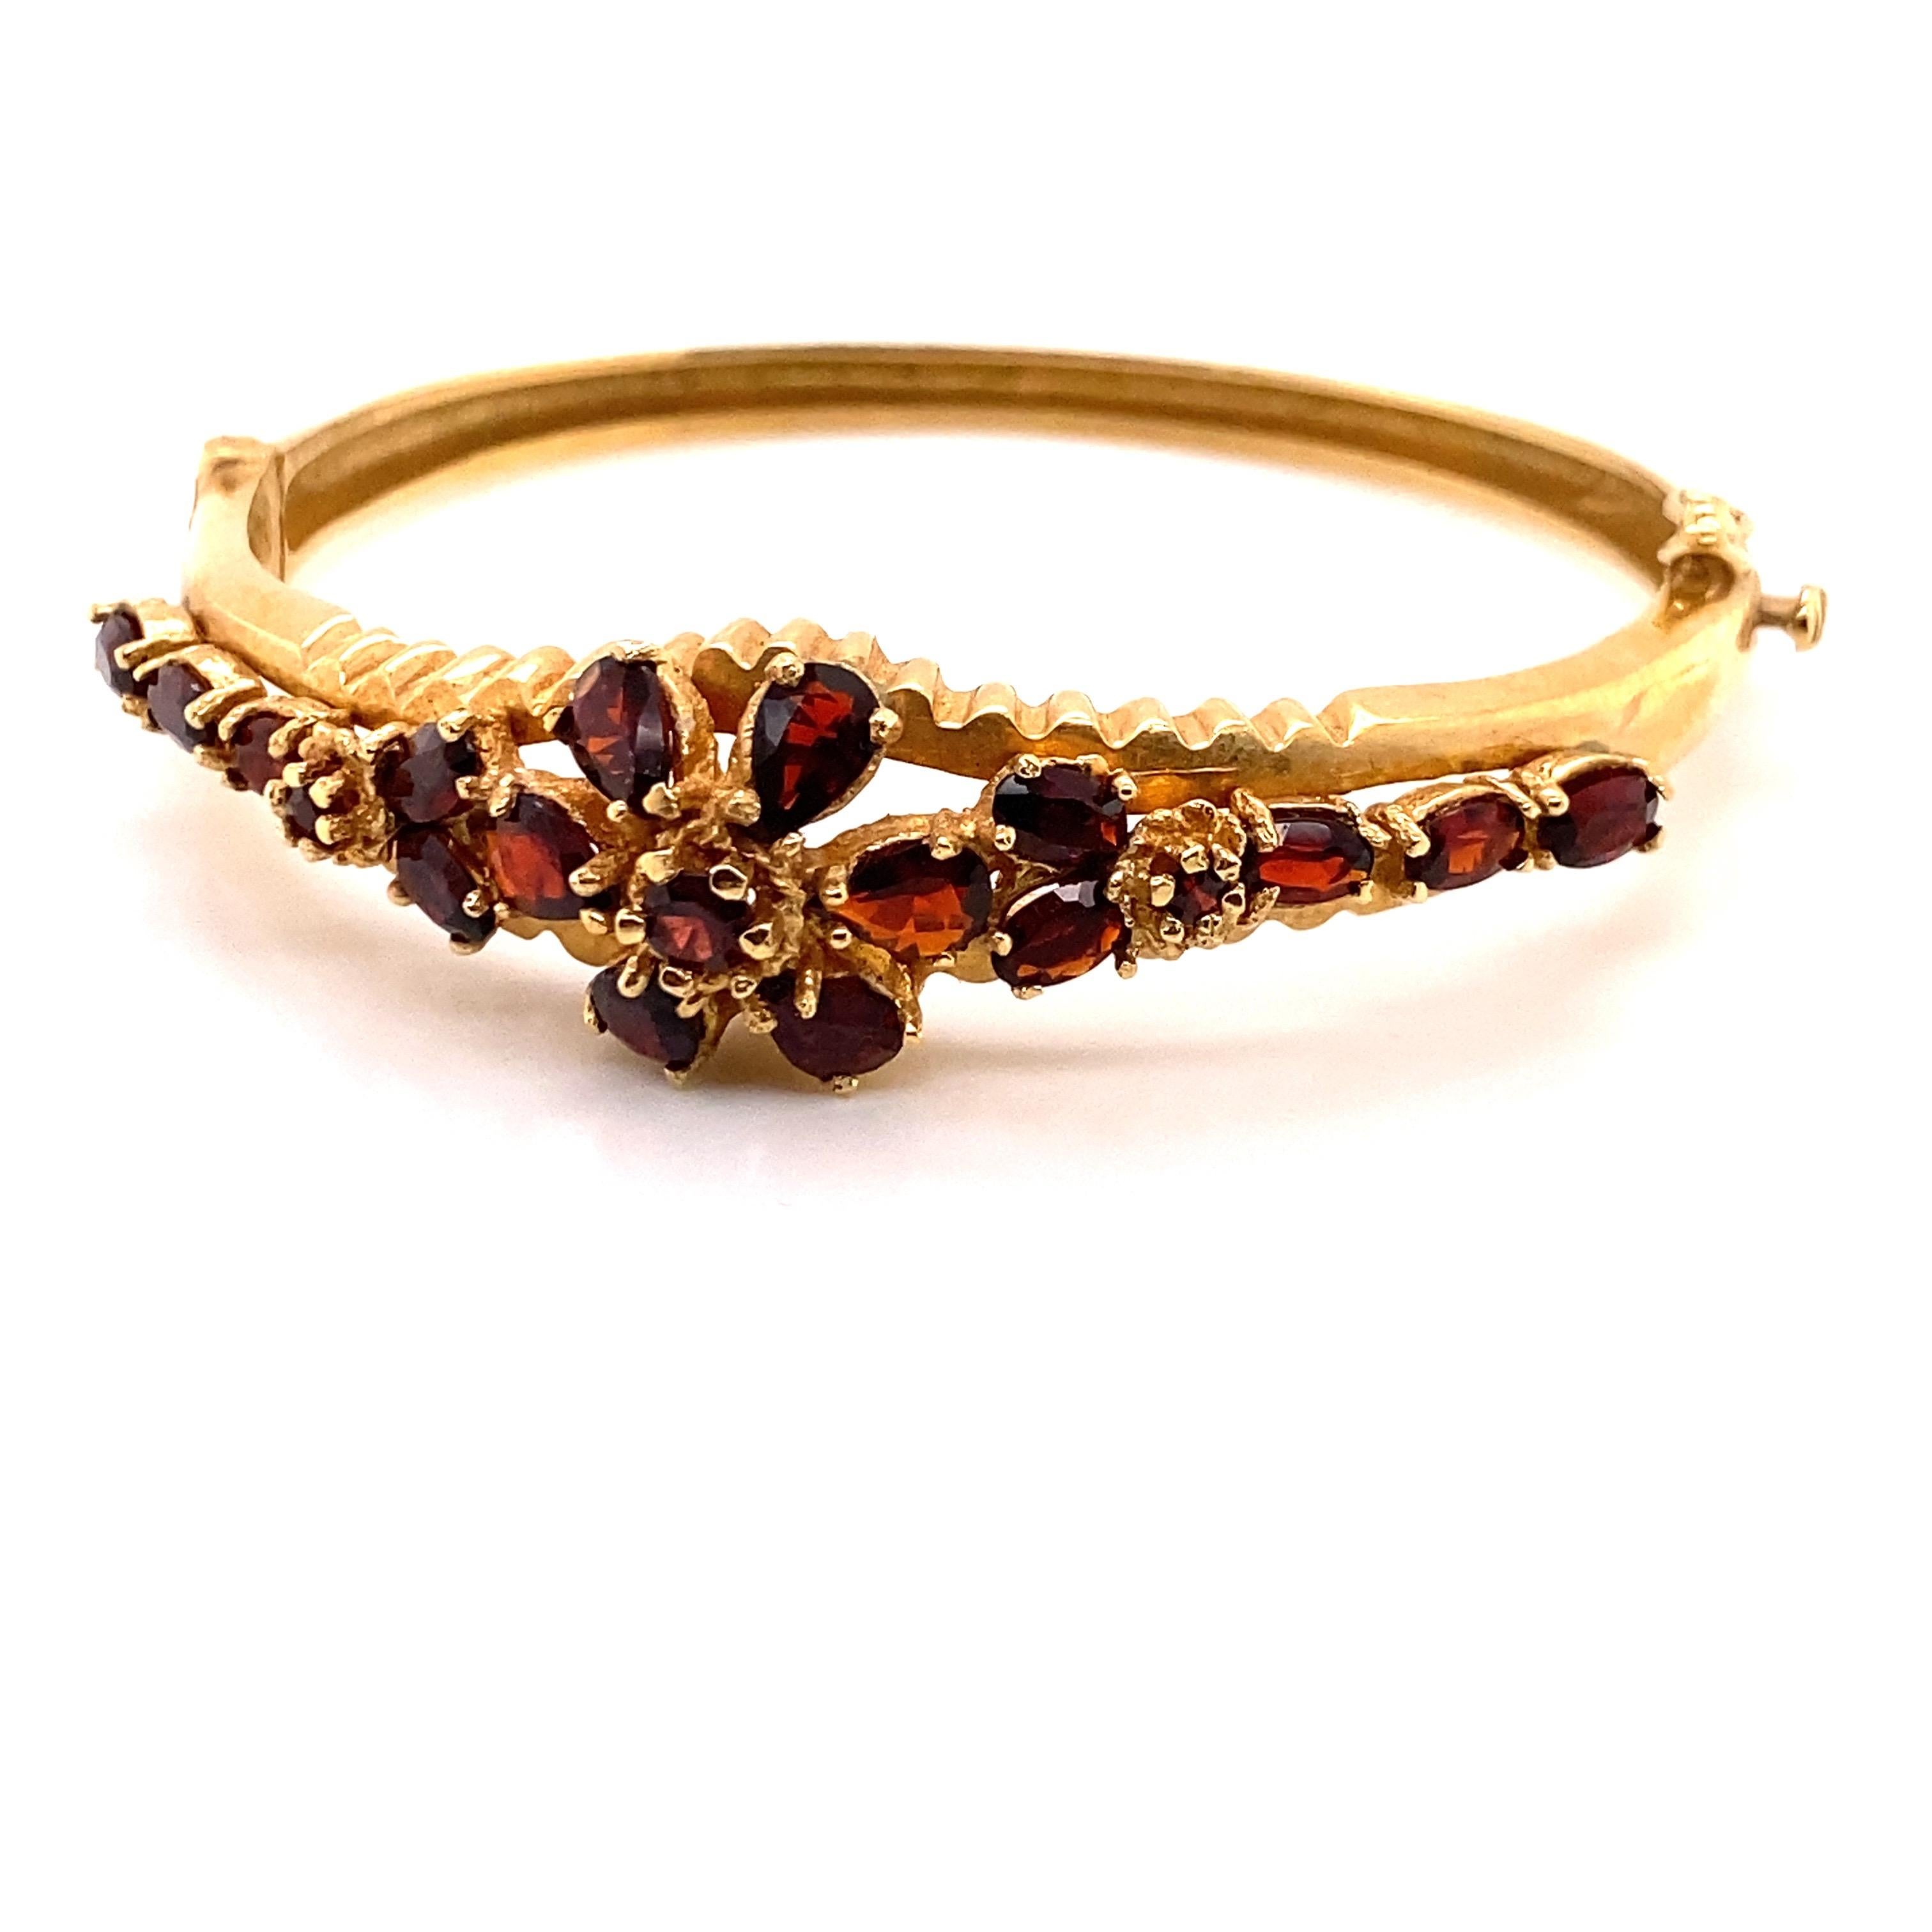 Vintage Victorian Reproduction Garnet Bangle Bracelet - The bracelet contains 19 pear shape, oval and round garnets. The width on top is 15mm and tapers down to 4mm on the bottom. The inside diameter is 2 inches high and 2.25 inches wide. The